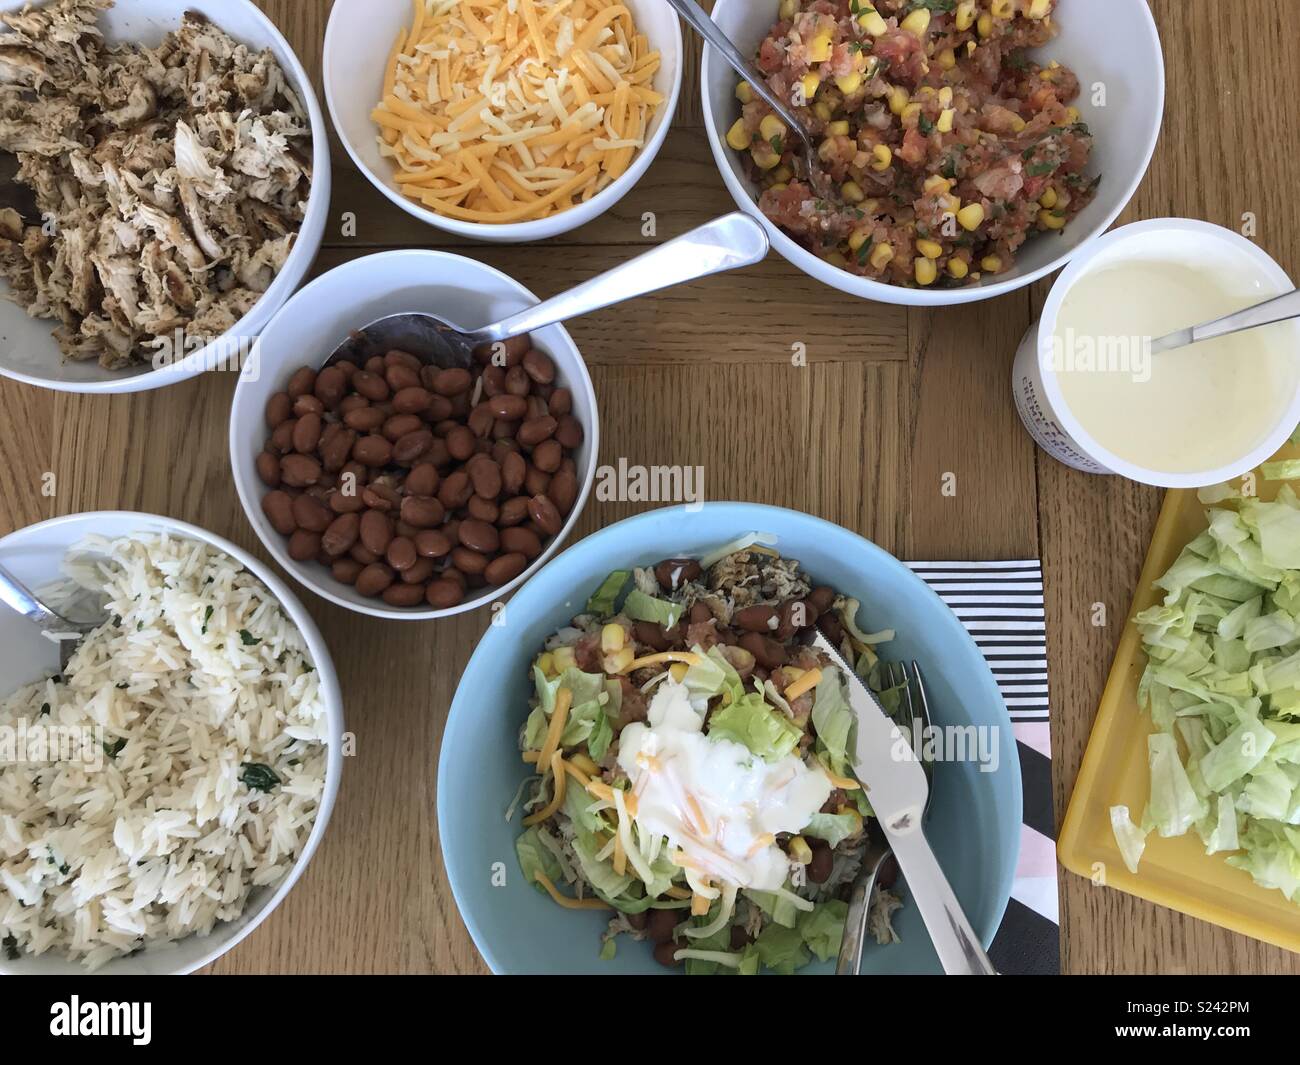 A spread of ingredients to make a spicy chicken burrito bowl at home Stock Photo